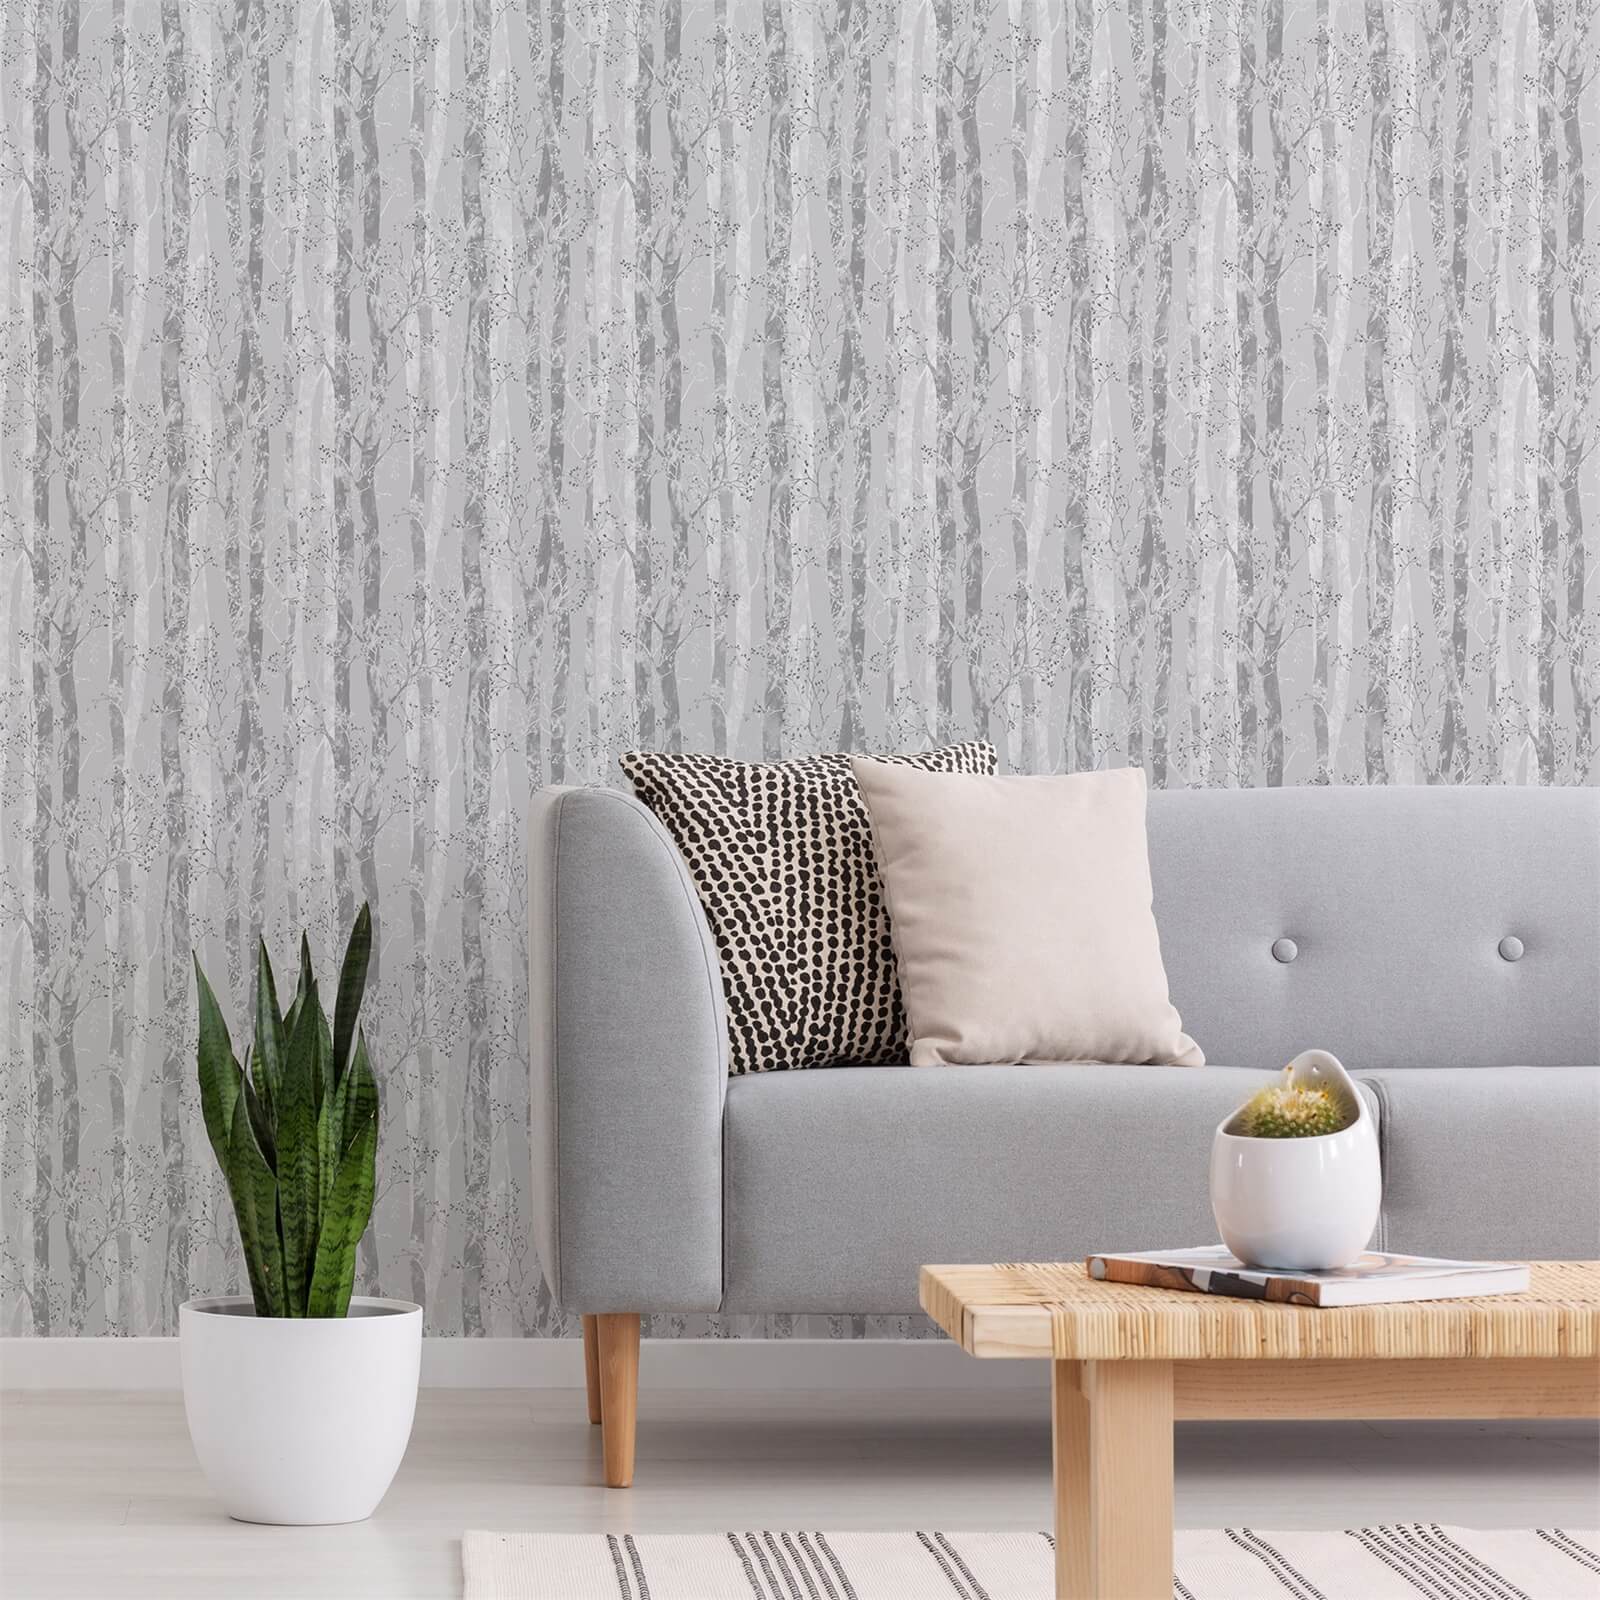 Sublime Dappled Trees Grey Silver Wallpaper